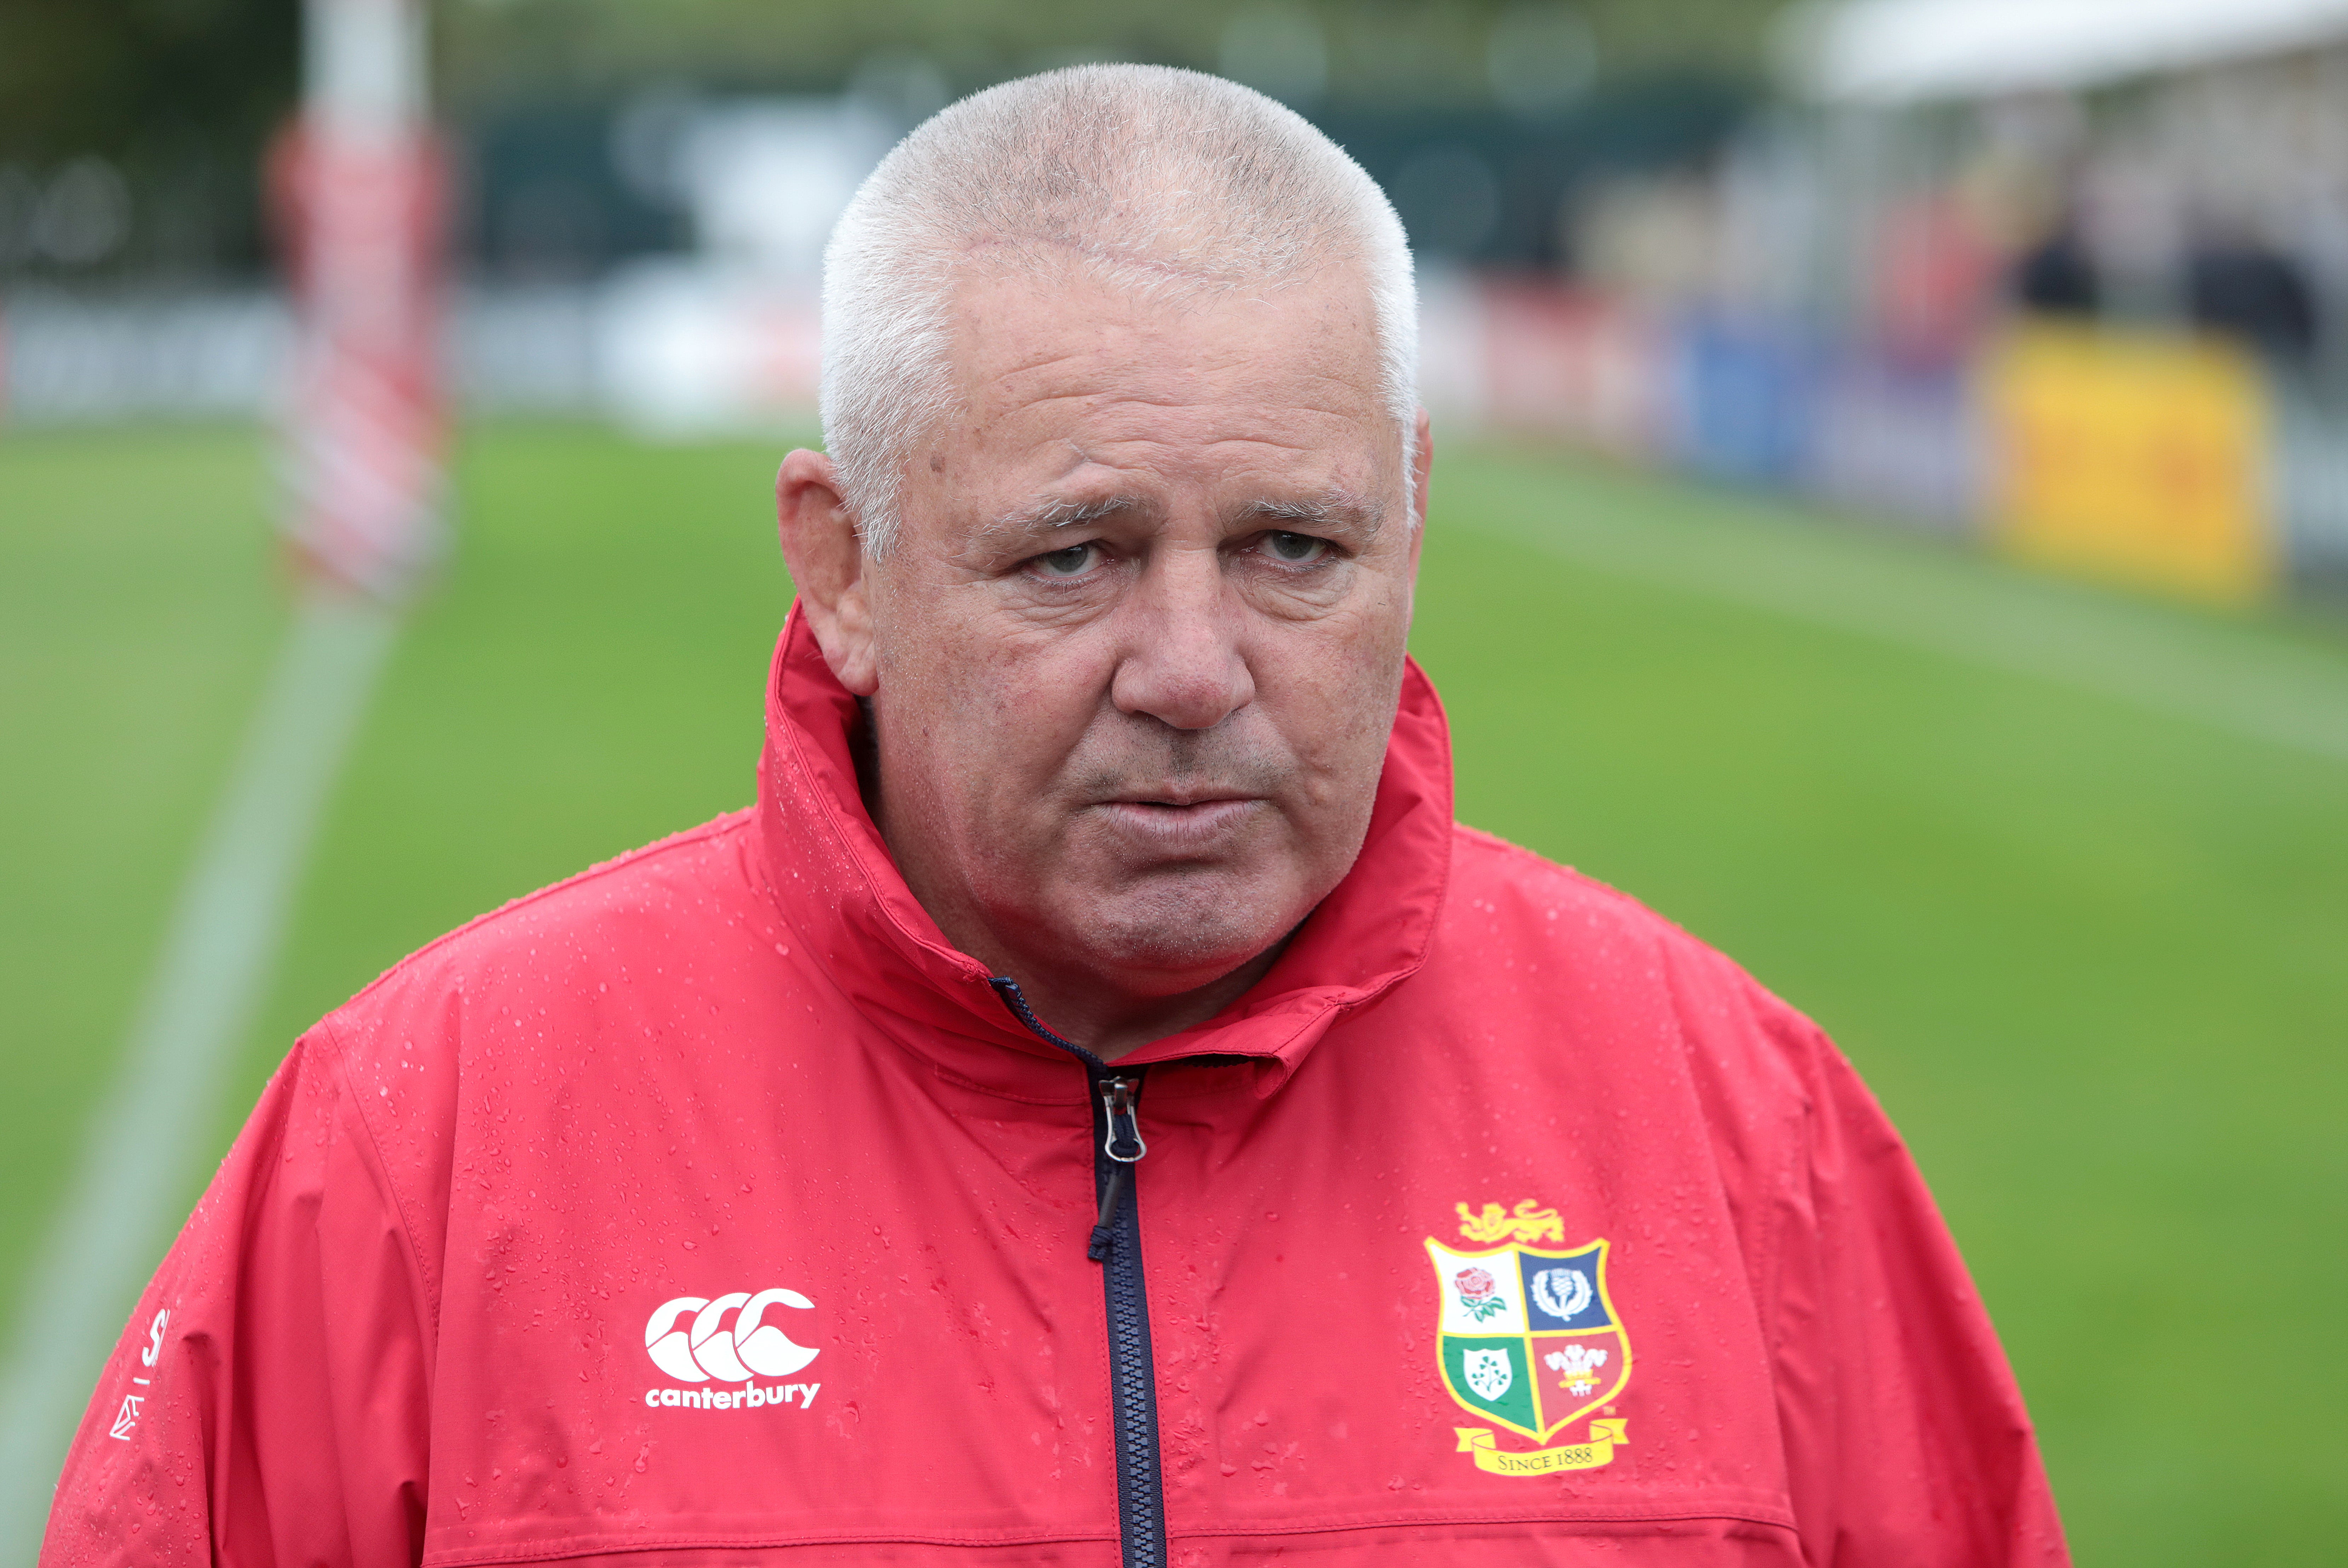 Warren Gatland, pictured, could pull off a "bonkers achievement", according to Gareth Thomas